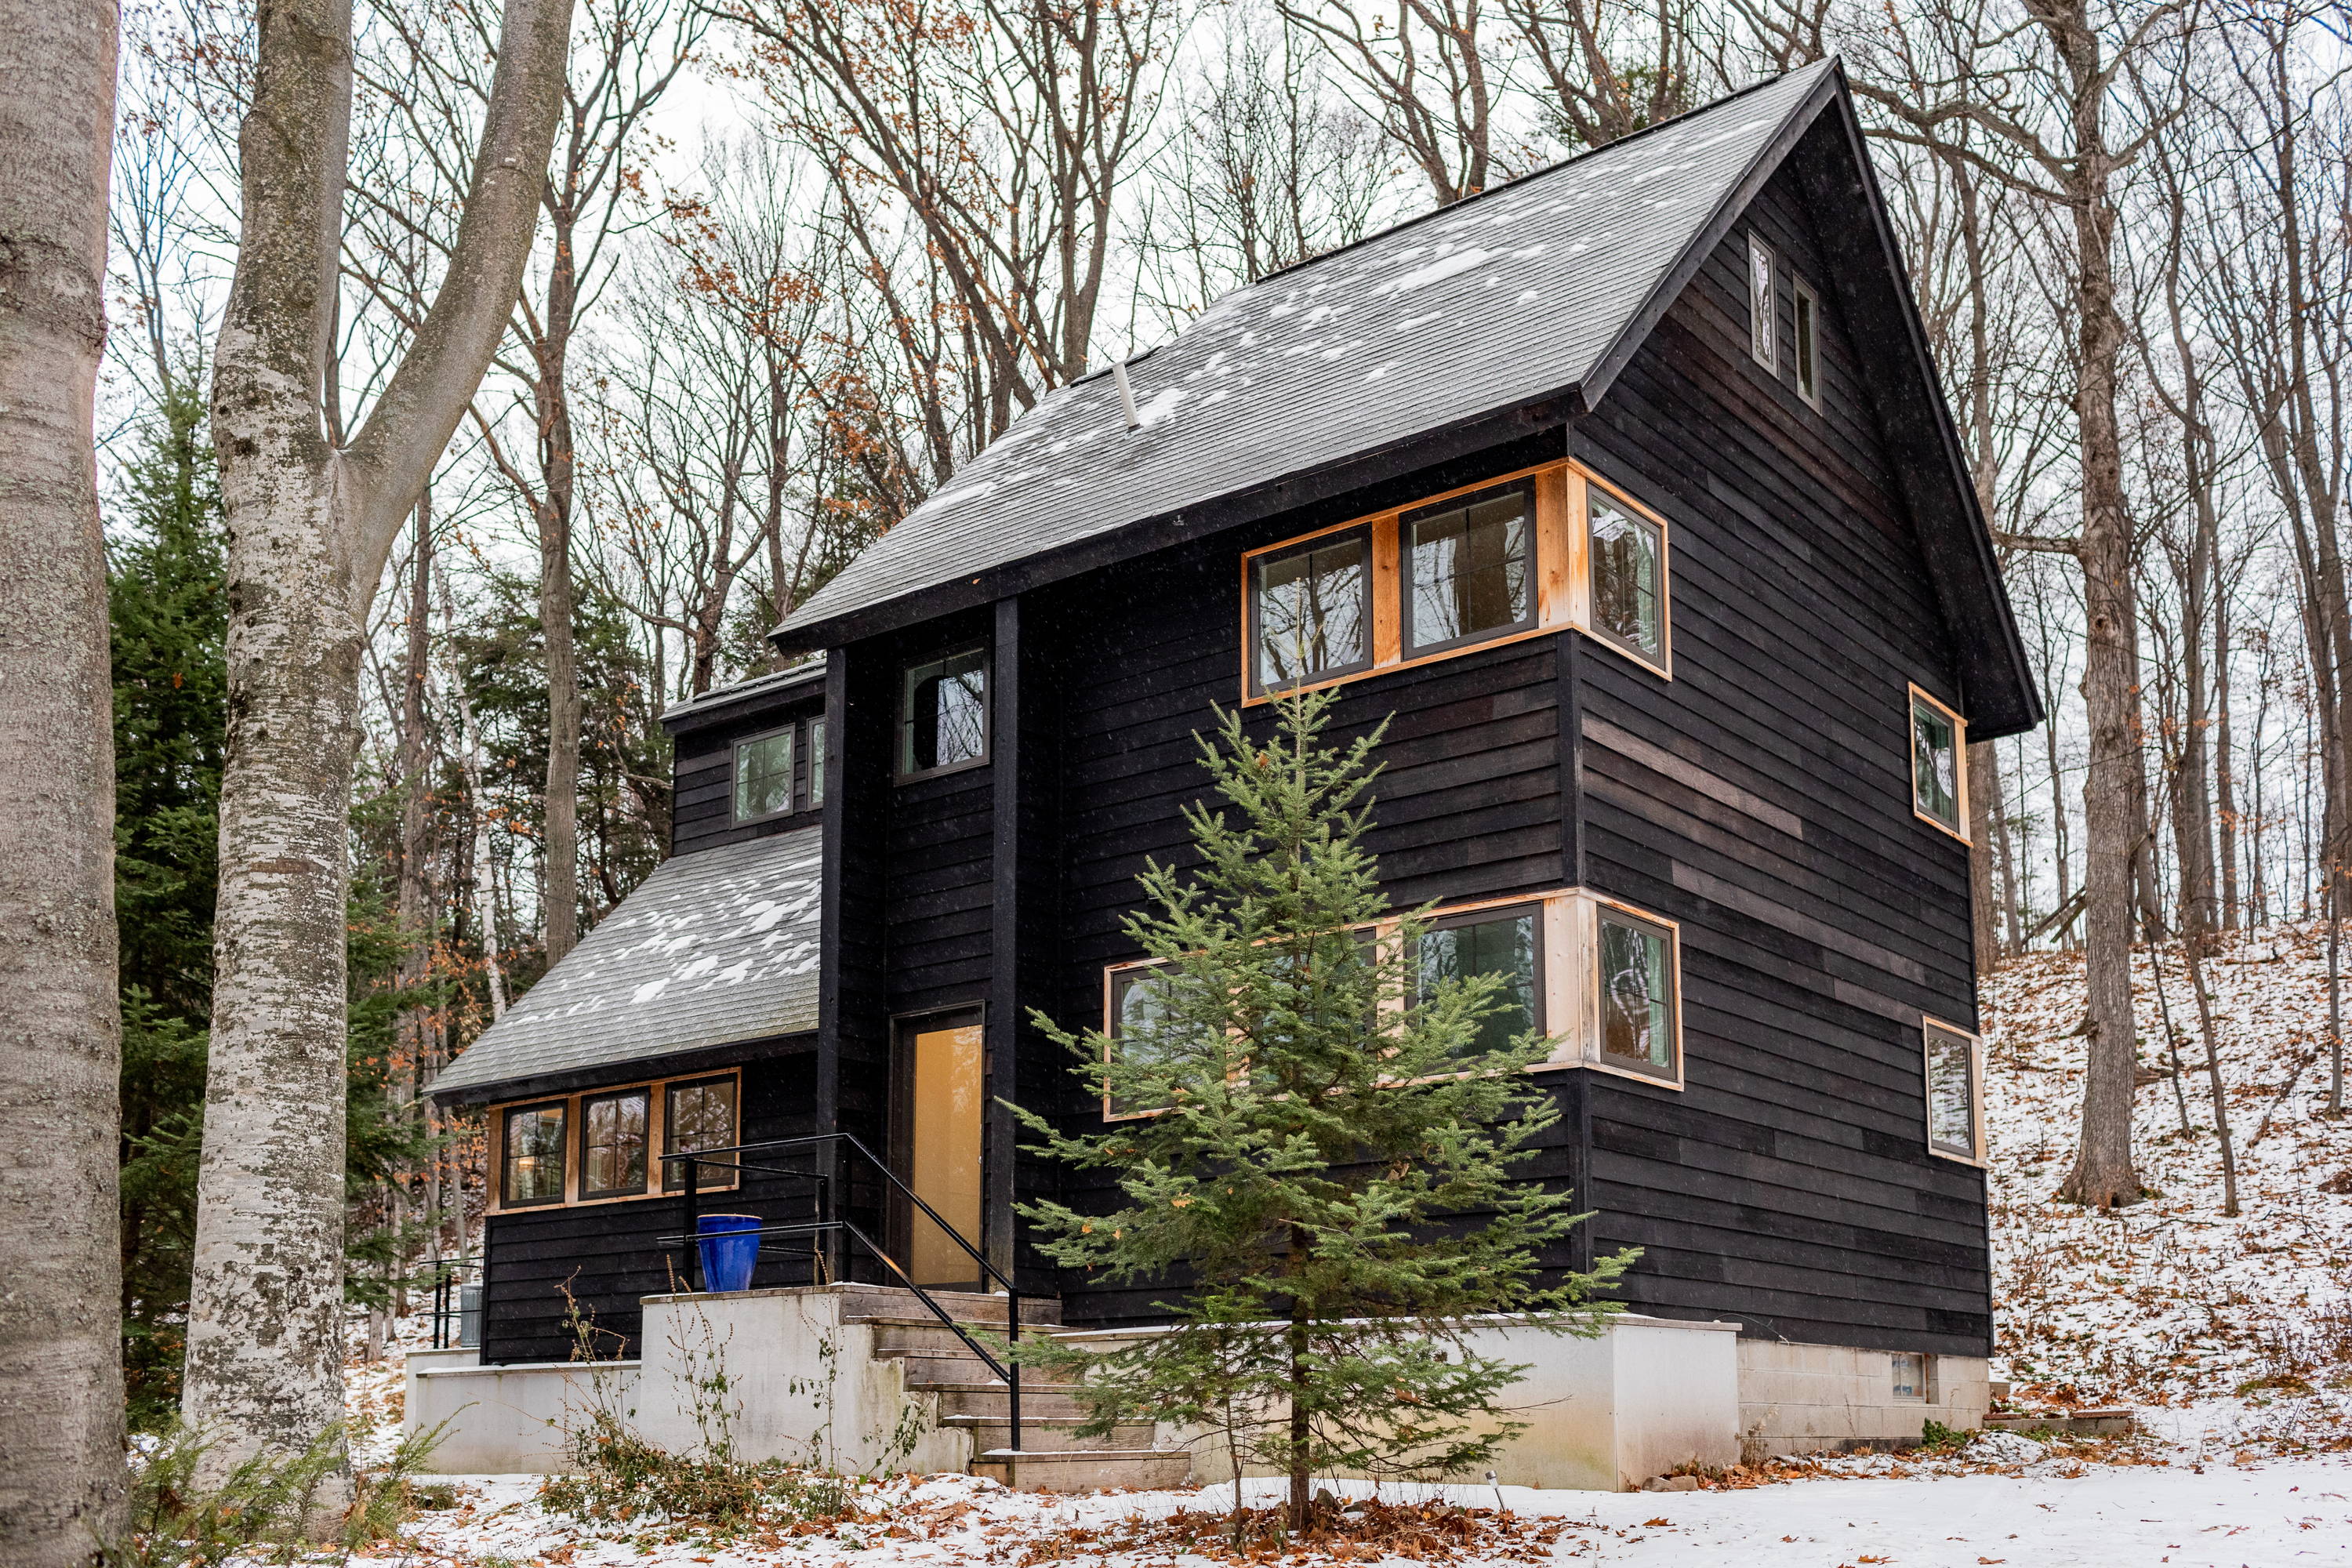 Entire home vacation rental in the woods. Large, Nordic style home.